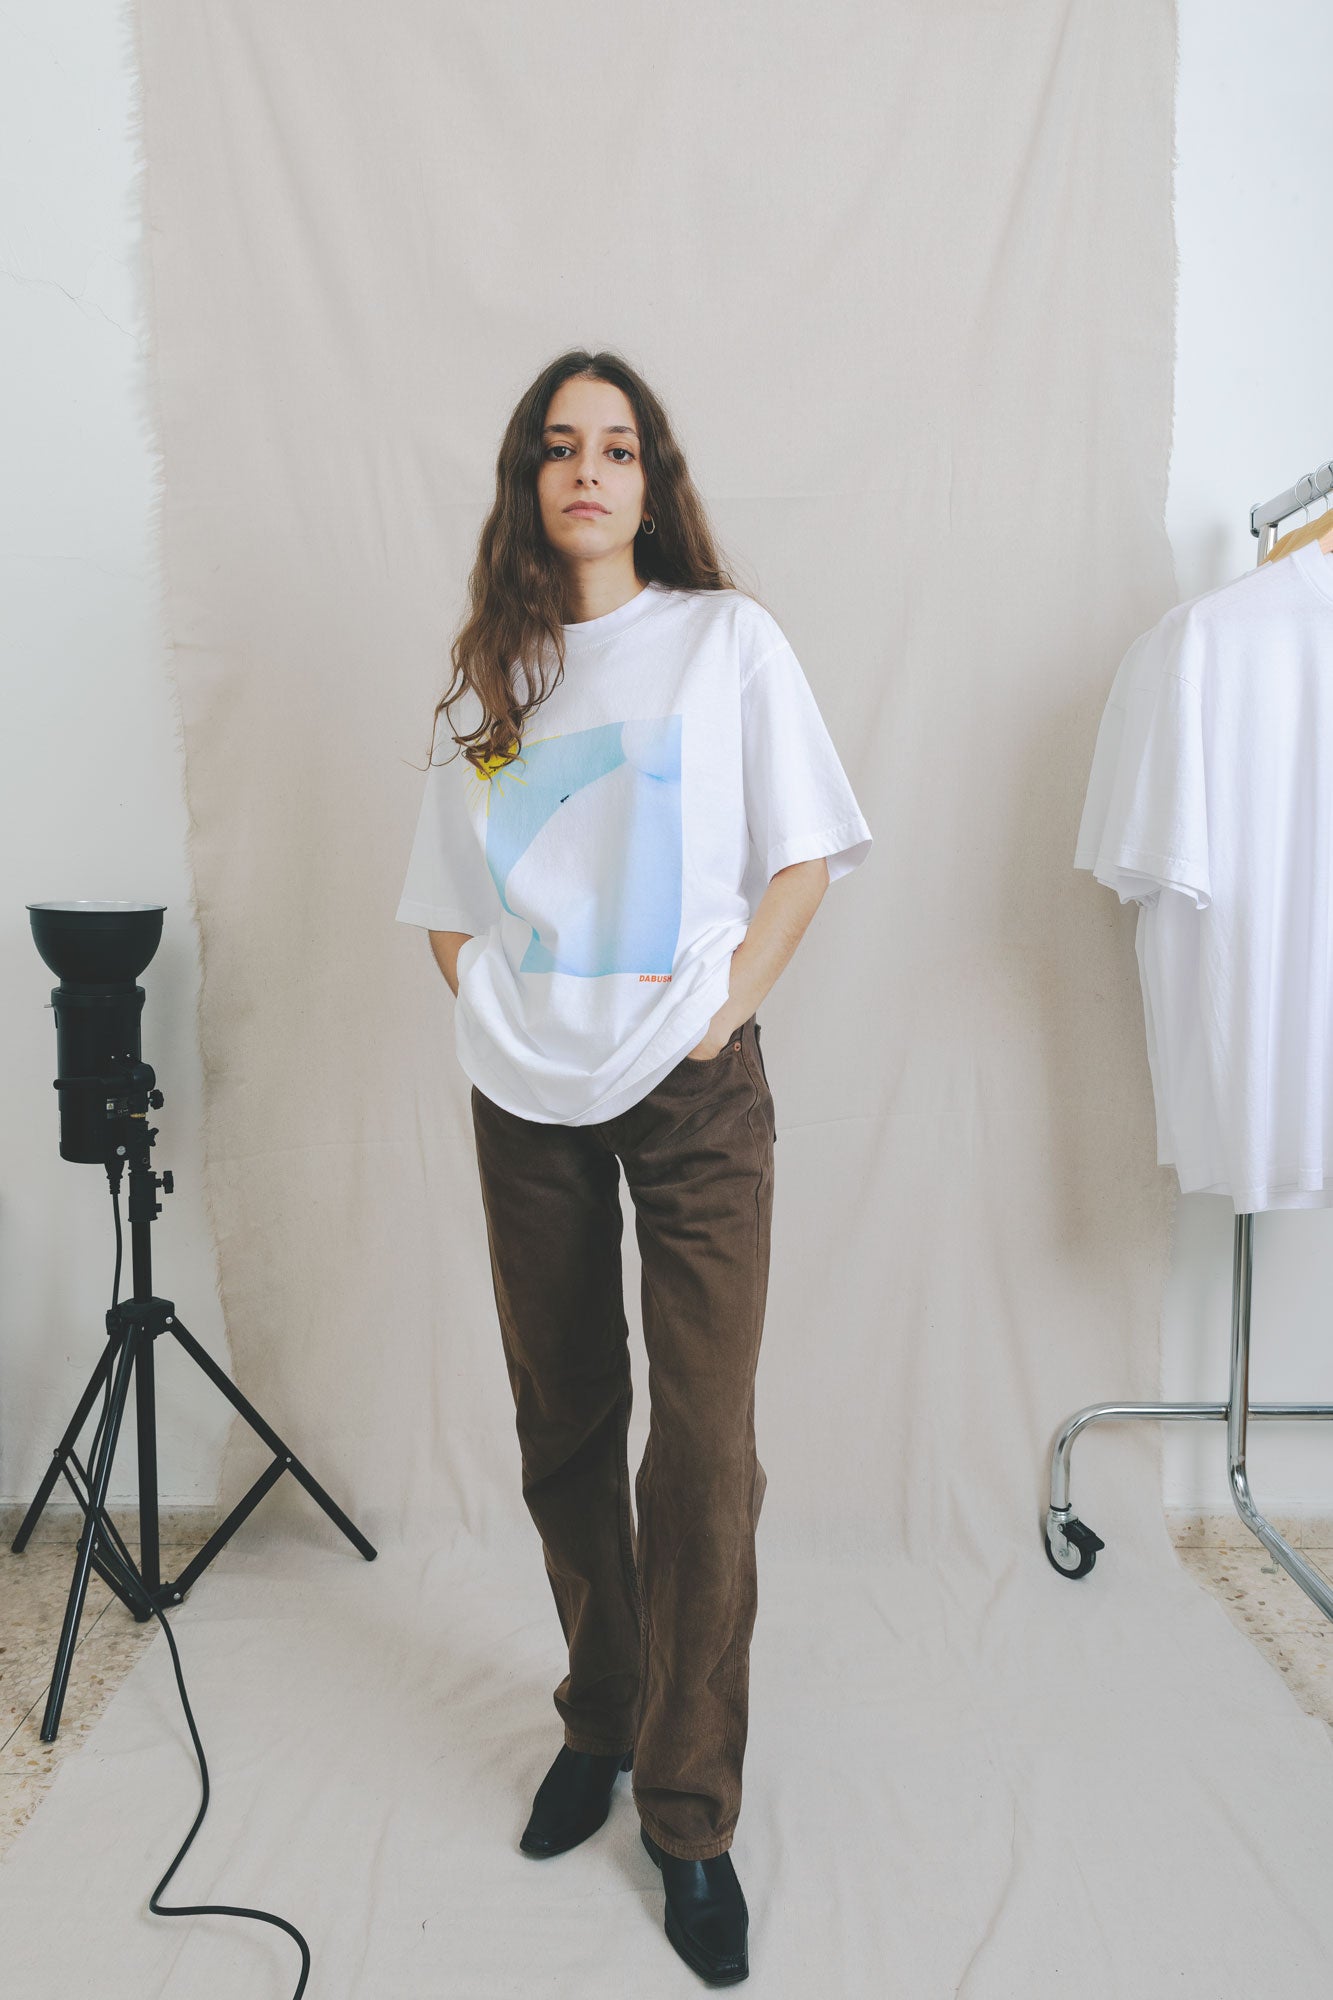 DABUSH PROTECTION T-SHIRT. 100% Cotton, oversized tee with  Back and front print. Made in Tel aviv. Shop and view the latest Drops from the official DABUSH website. Worldwide Shipping. DABUSH is a publishing house, design studio and a brand based in Tel Aviv, Israel.